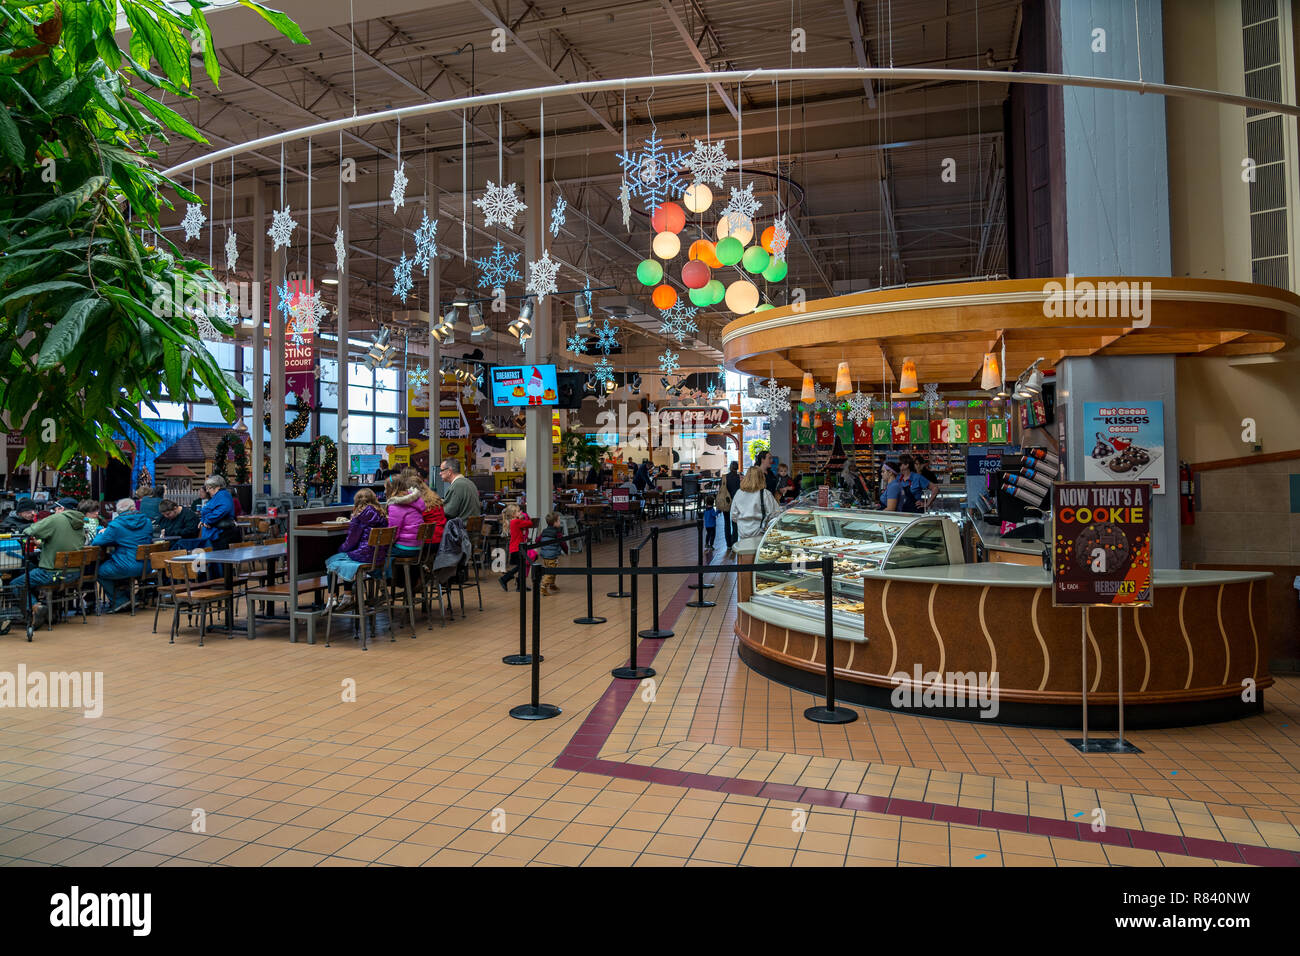 Hershey, PA, USA - December 11, 2018:  Inside Chocolate World, there are exhibits, ride, products, and a food court for tourists to visit. Stock Photo